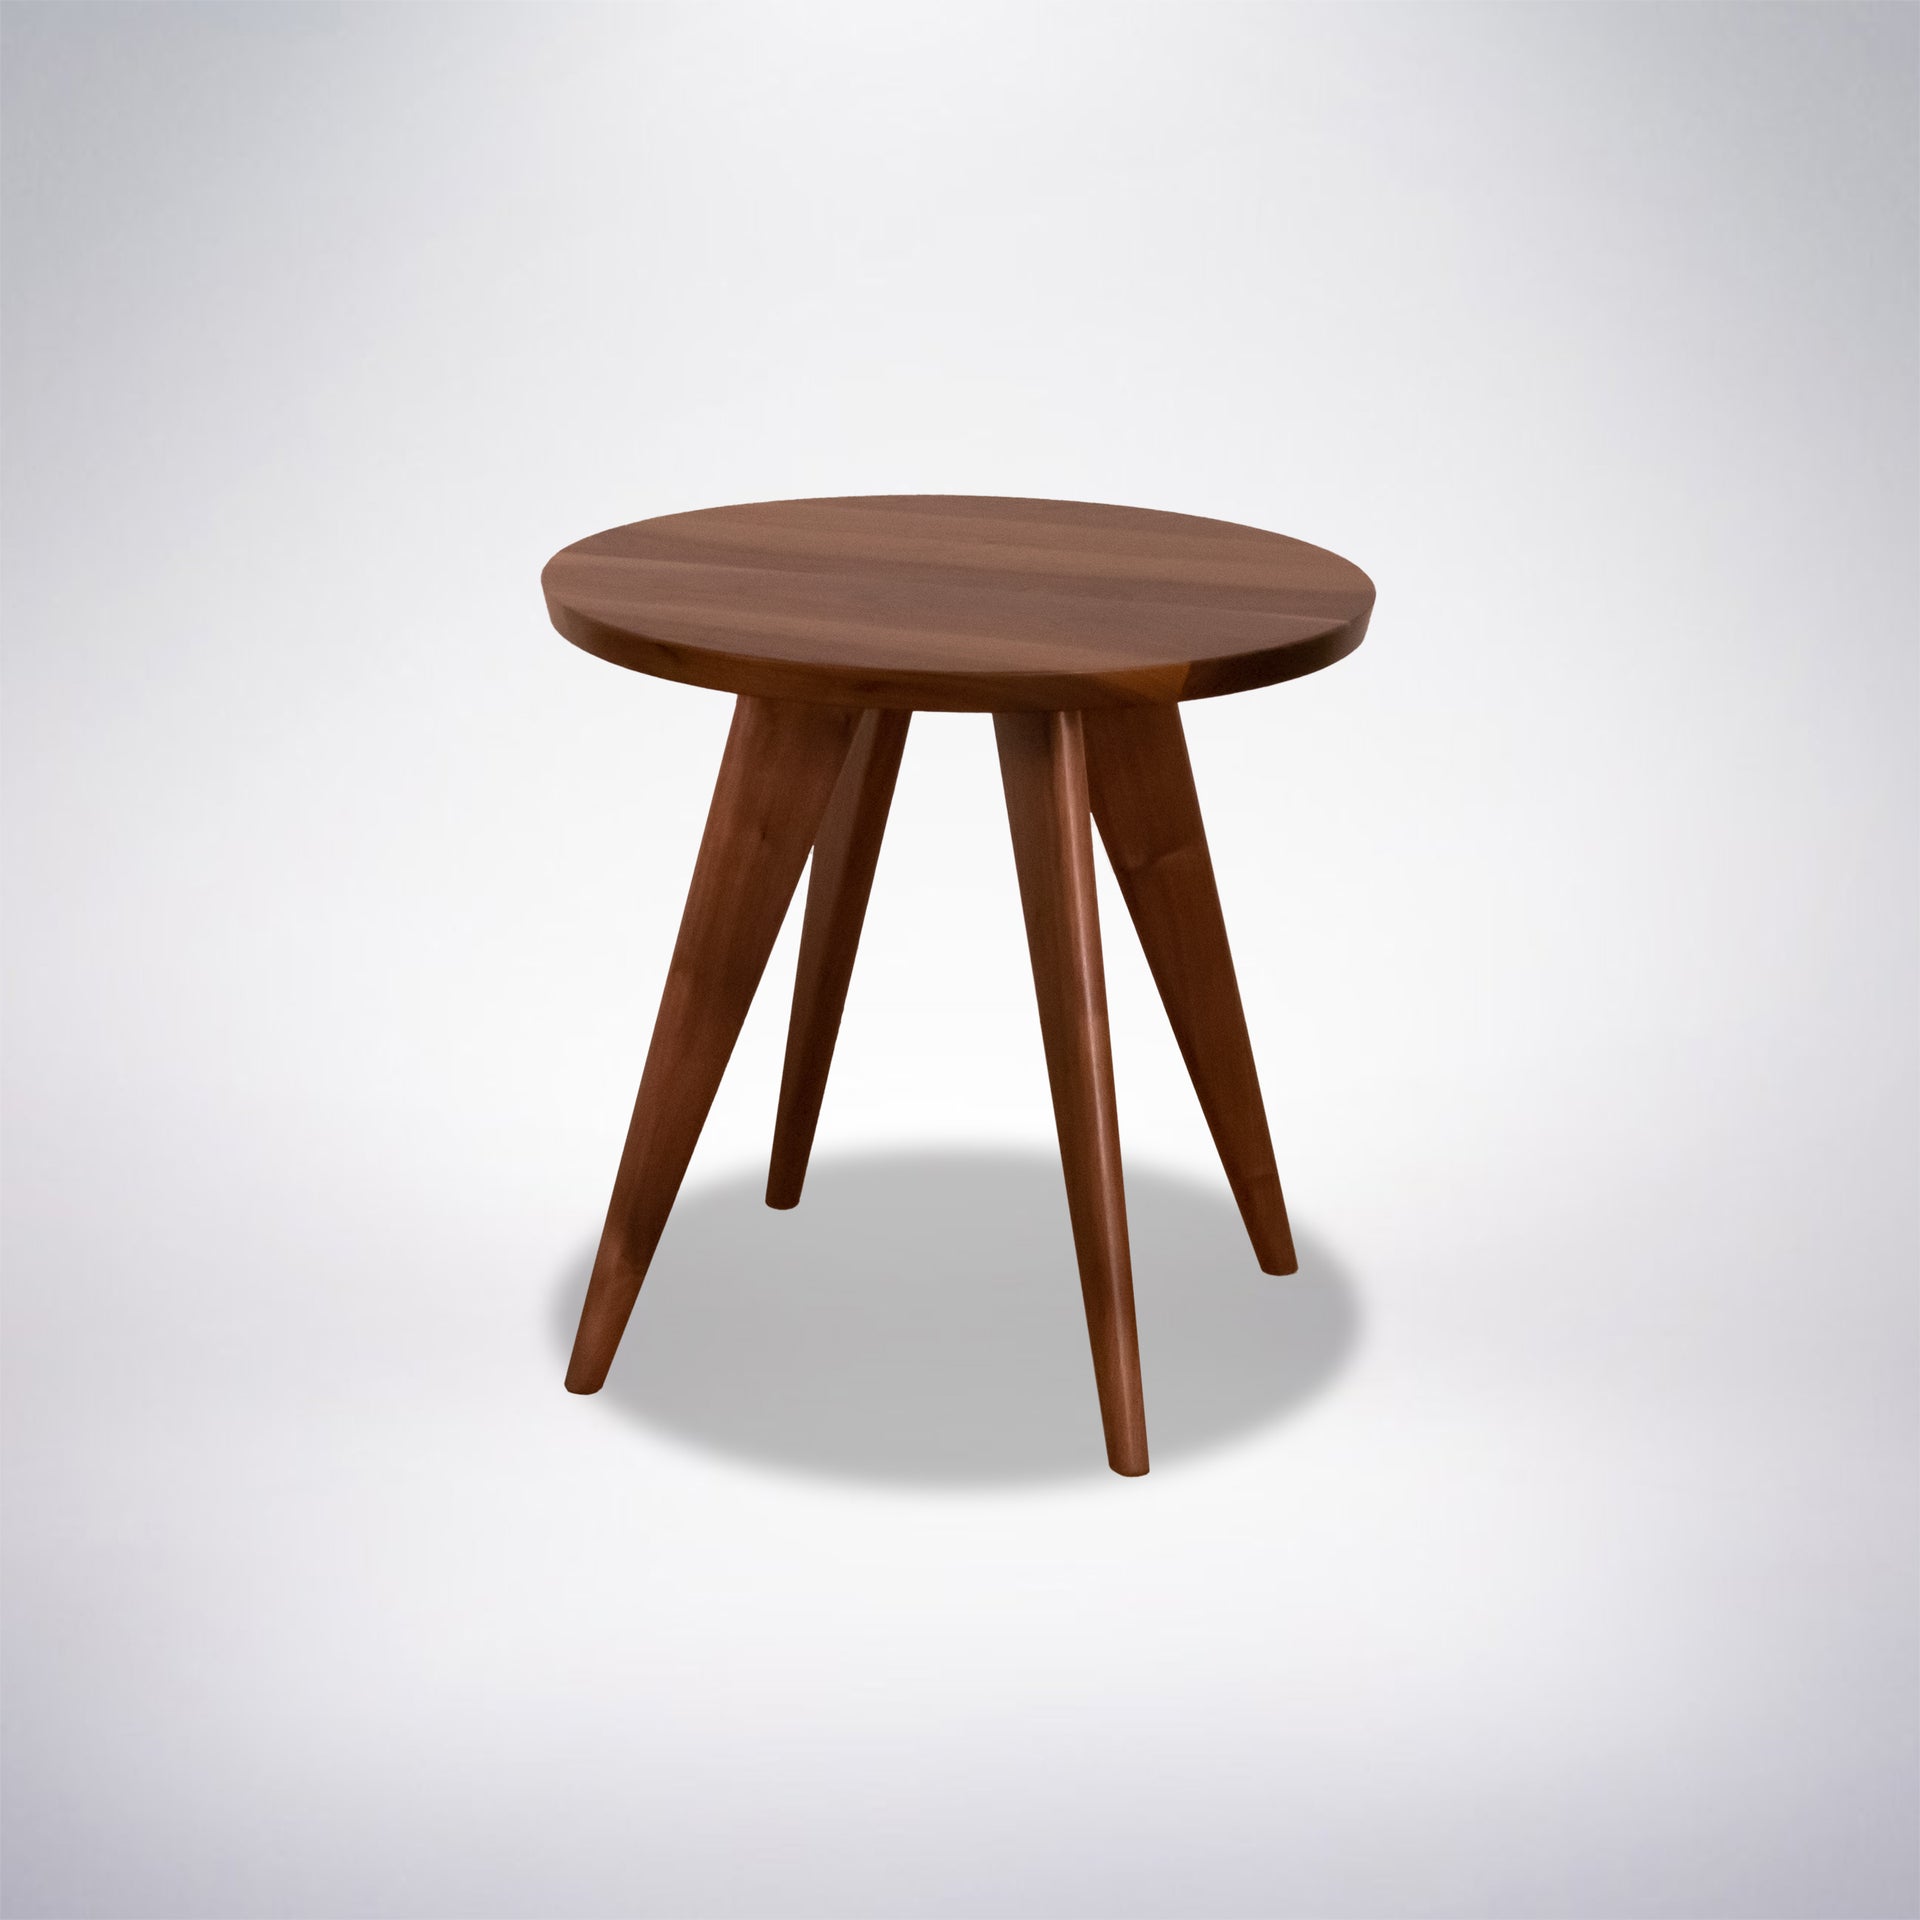 Solid walnut side table built in Columbus, Ohio